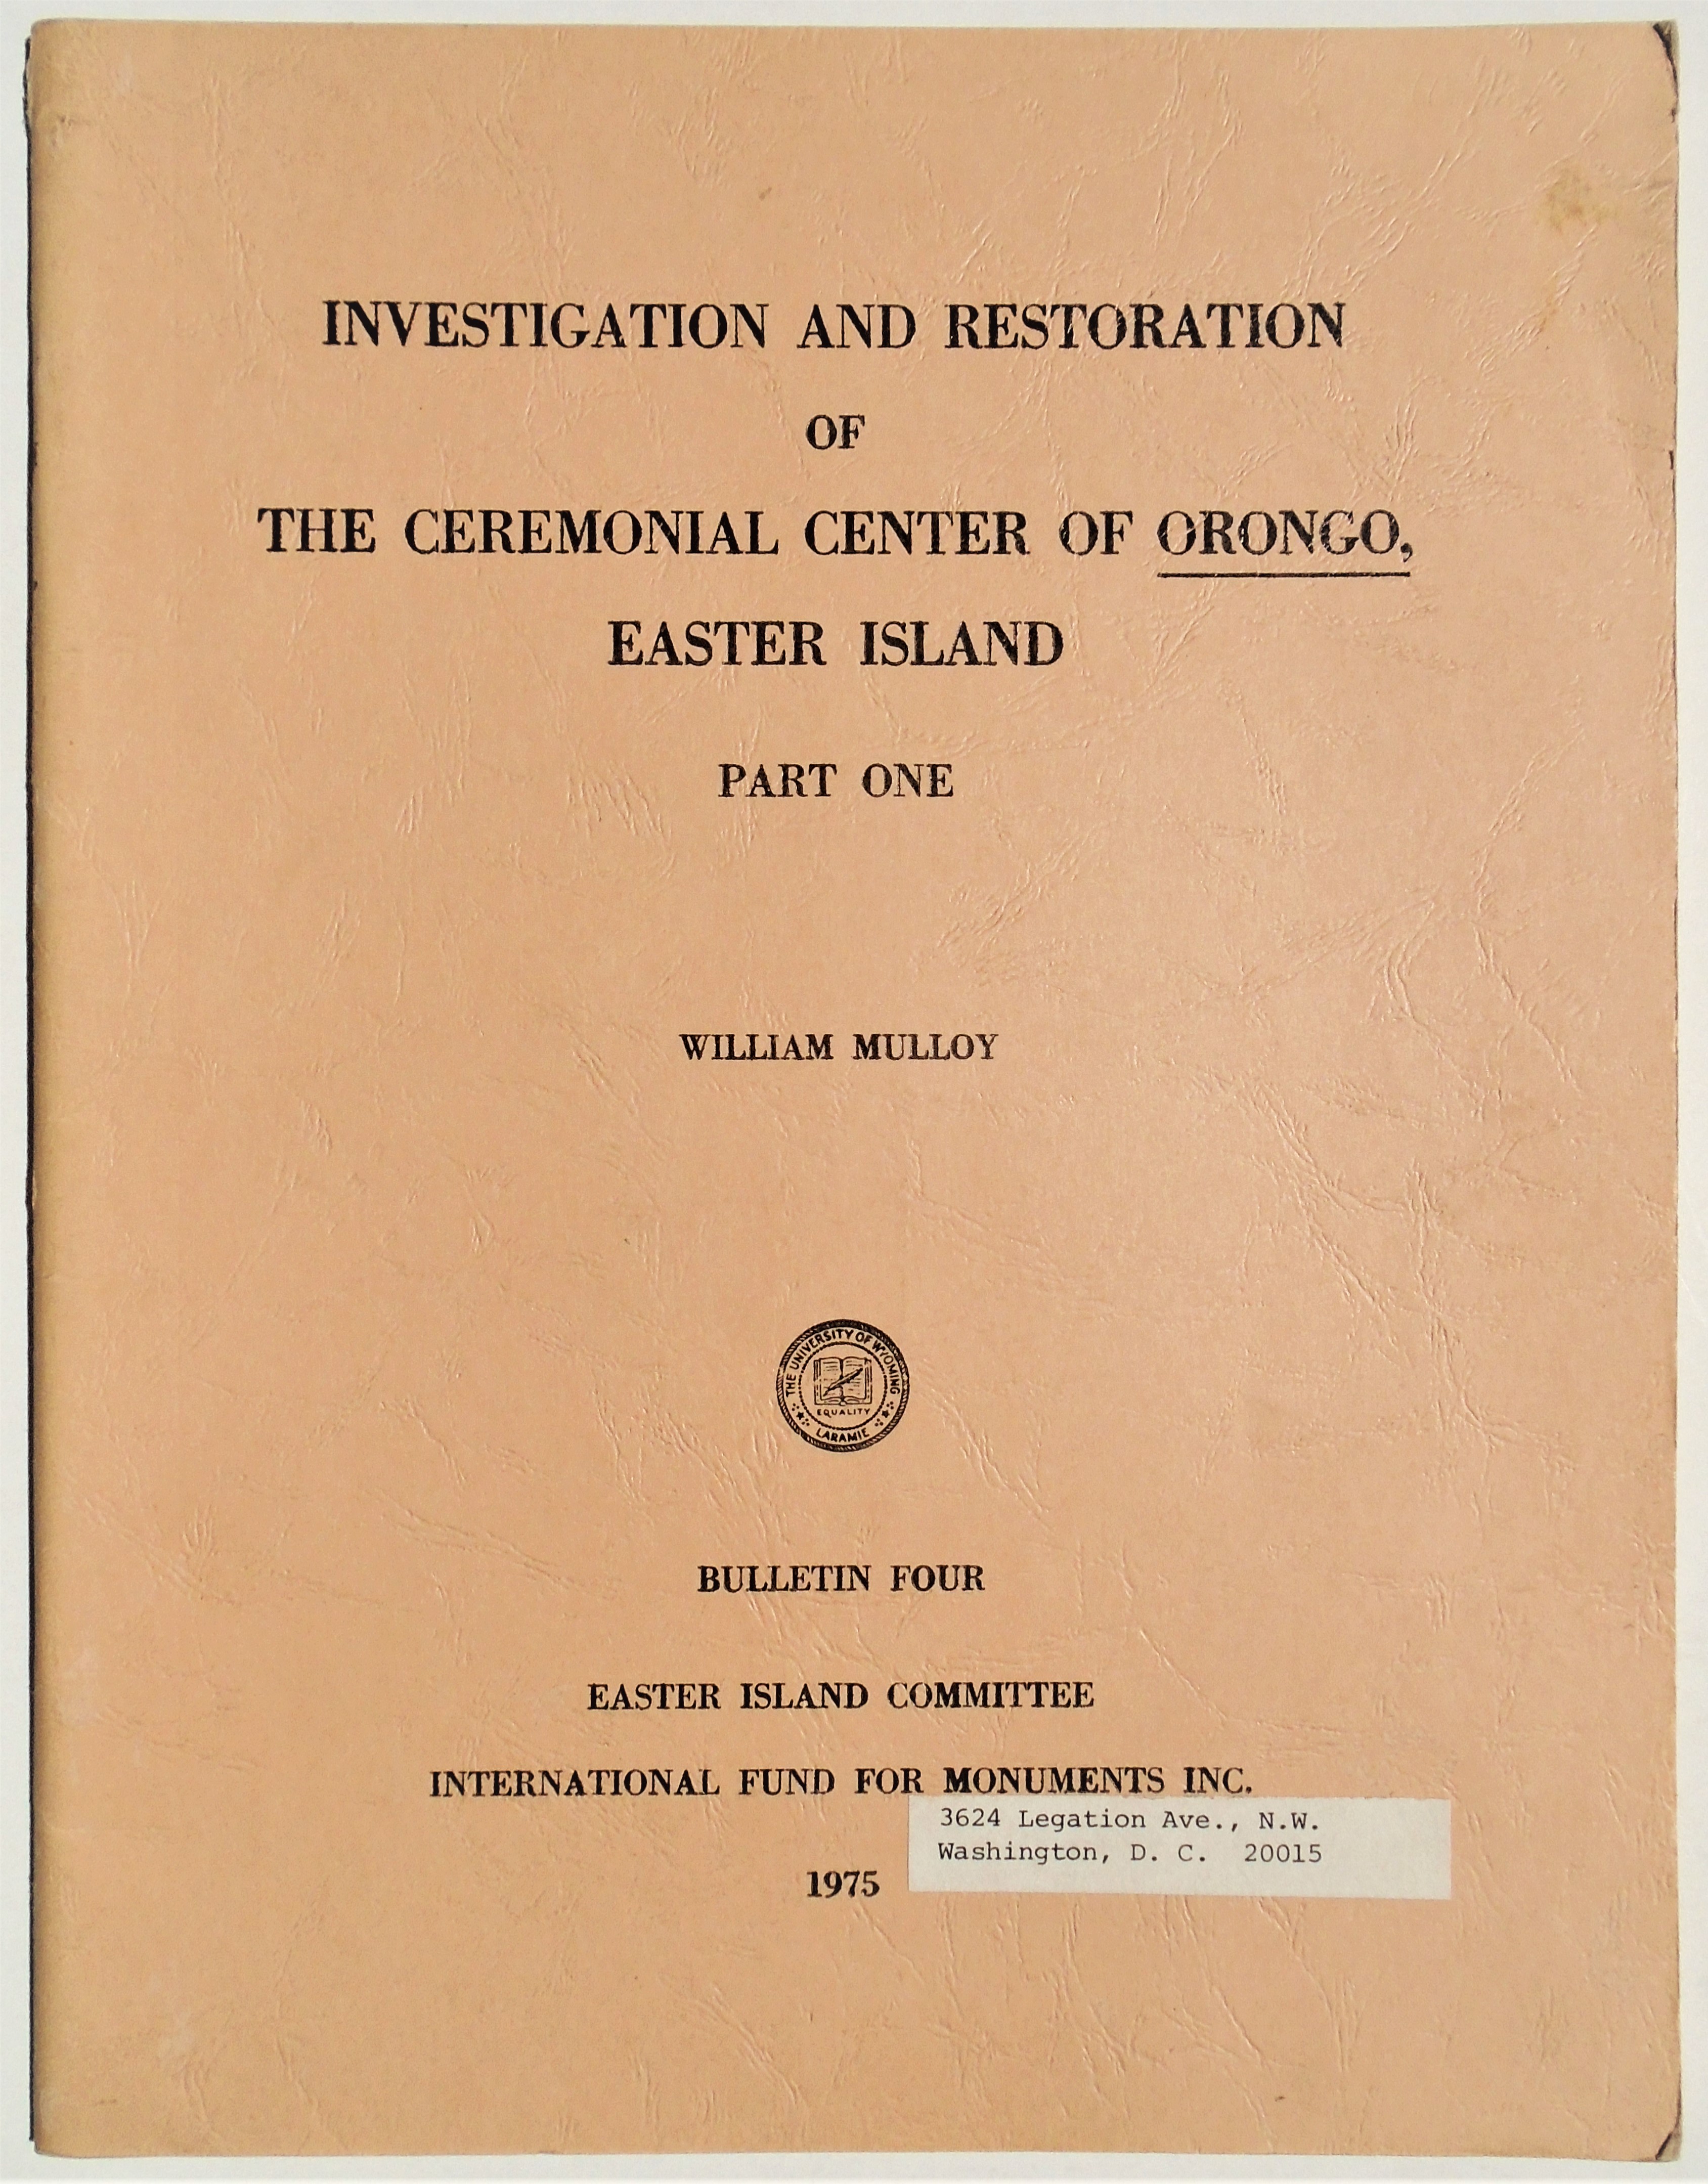 William Mulloy - Investigation and restoration of the ceremonial center of Orongo